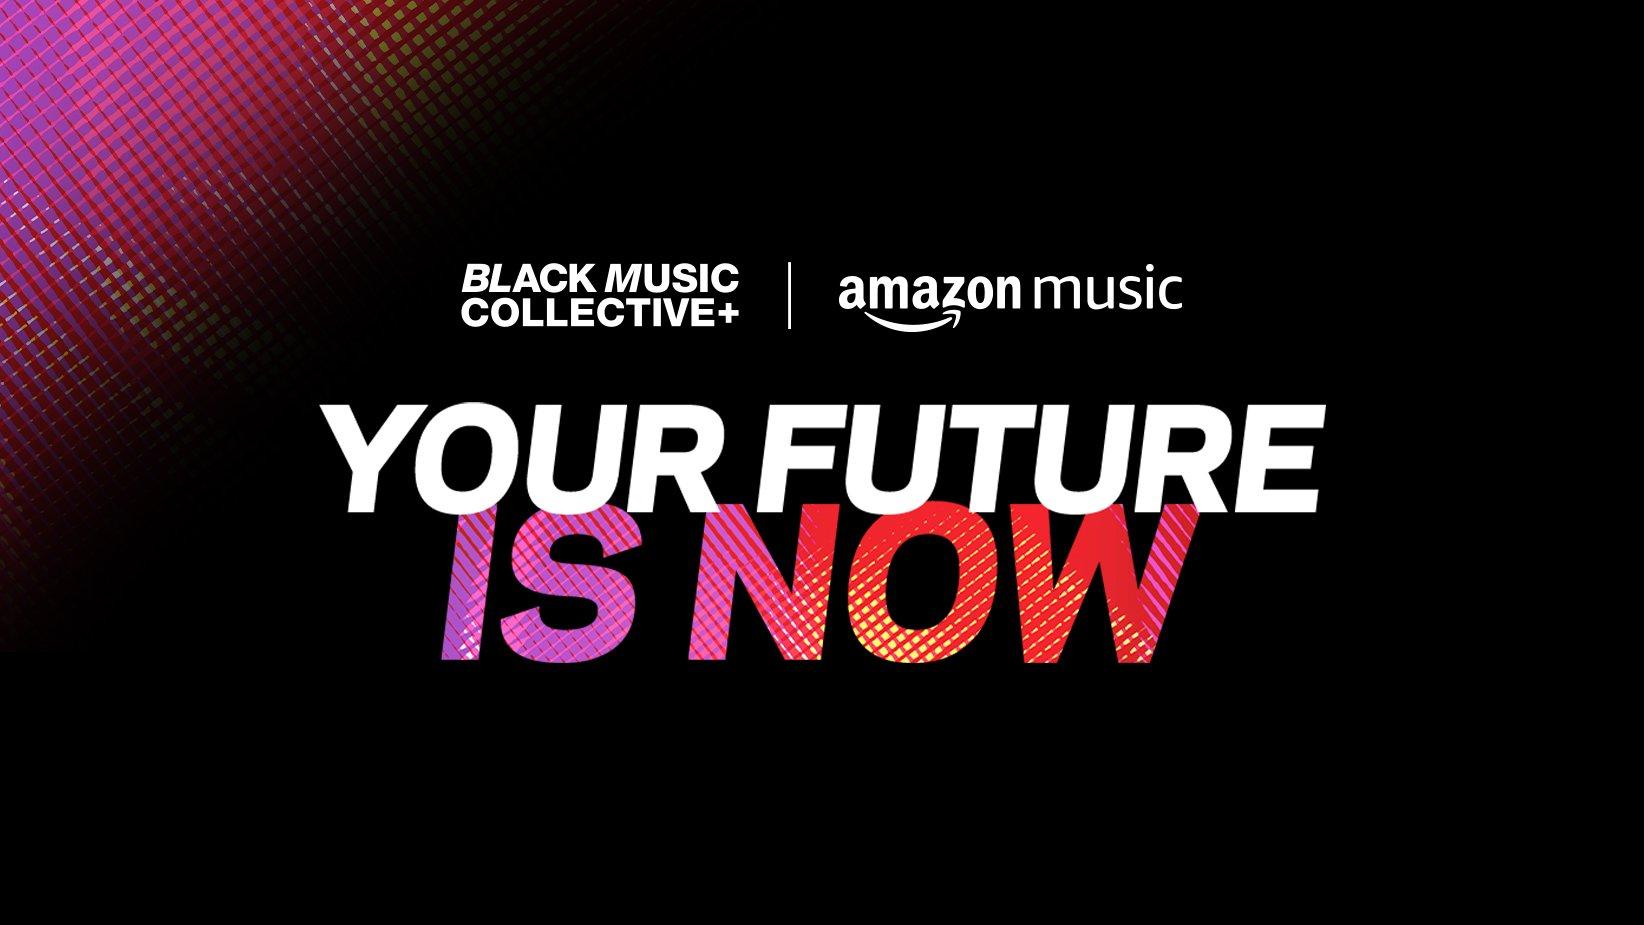 Graphic for the Recording Academy's Black Music Collective (BMC) and Amazon Music donations announcement